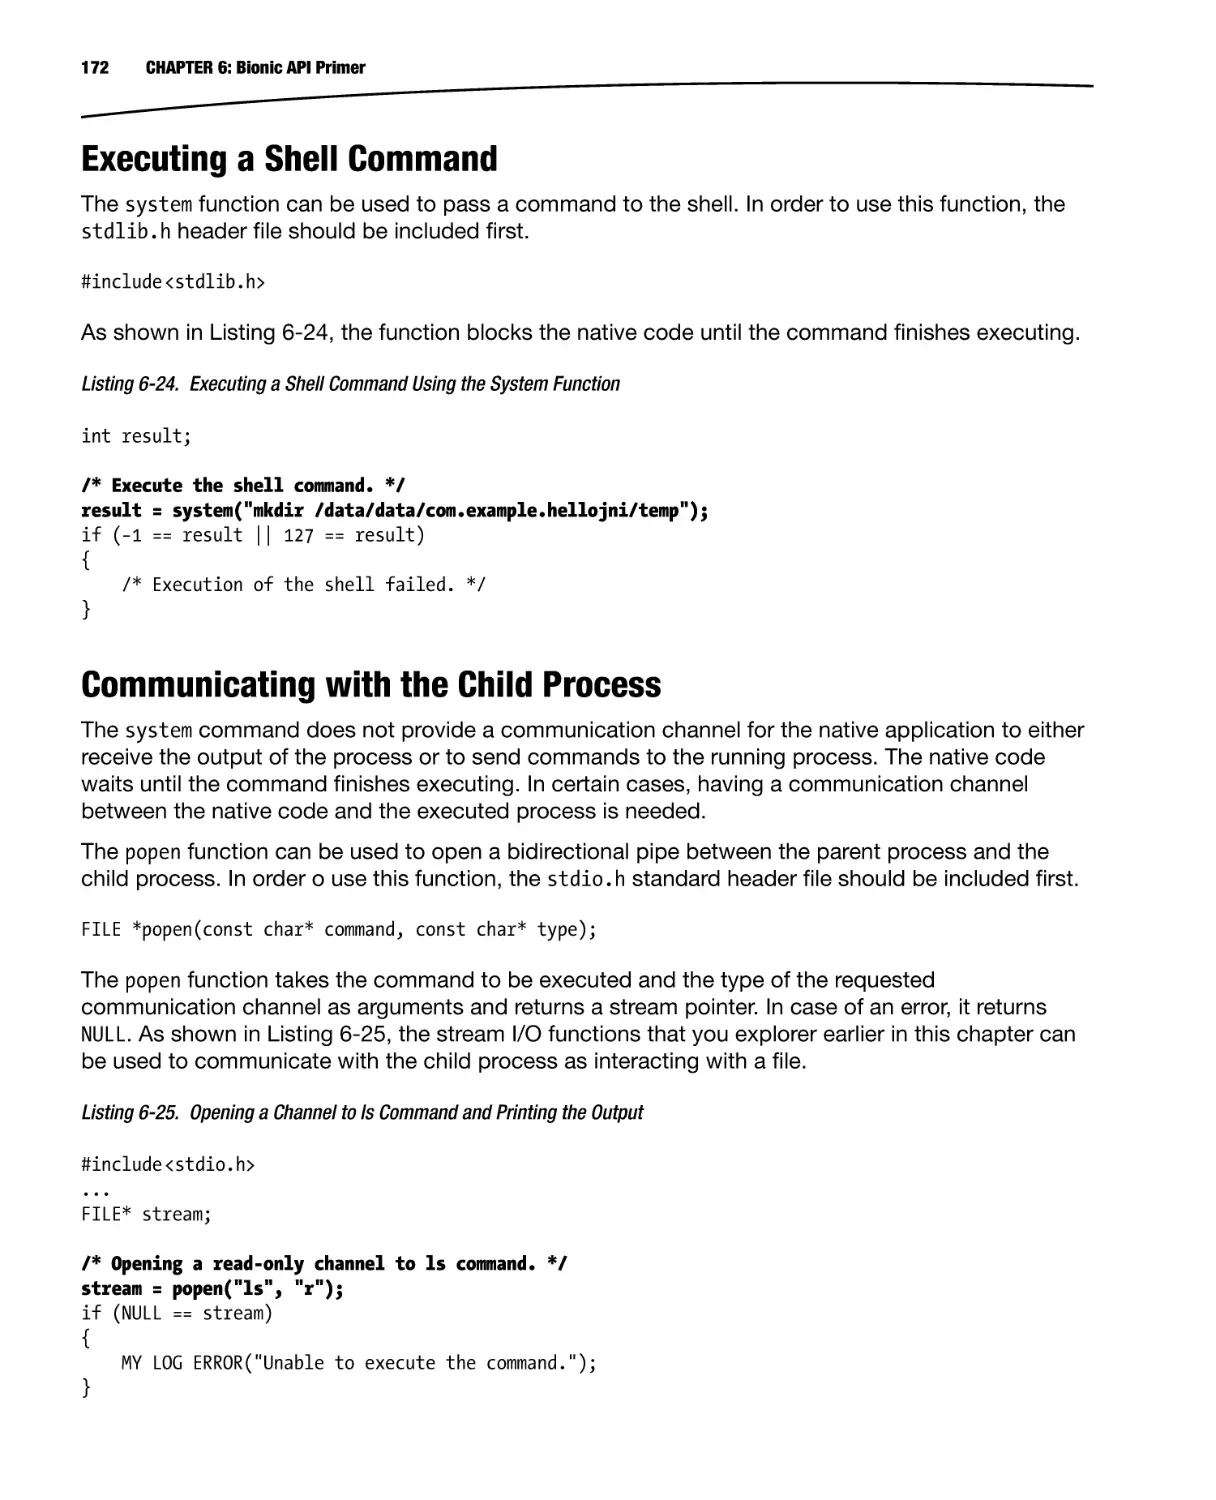 Executing a Shell Command
Communicating with the Child Process